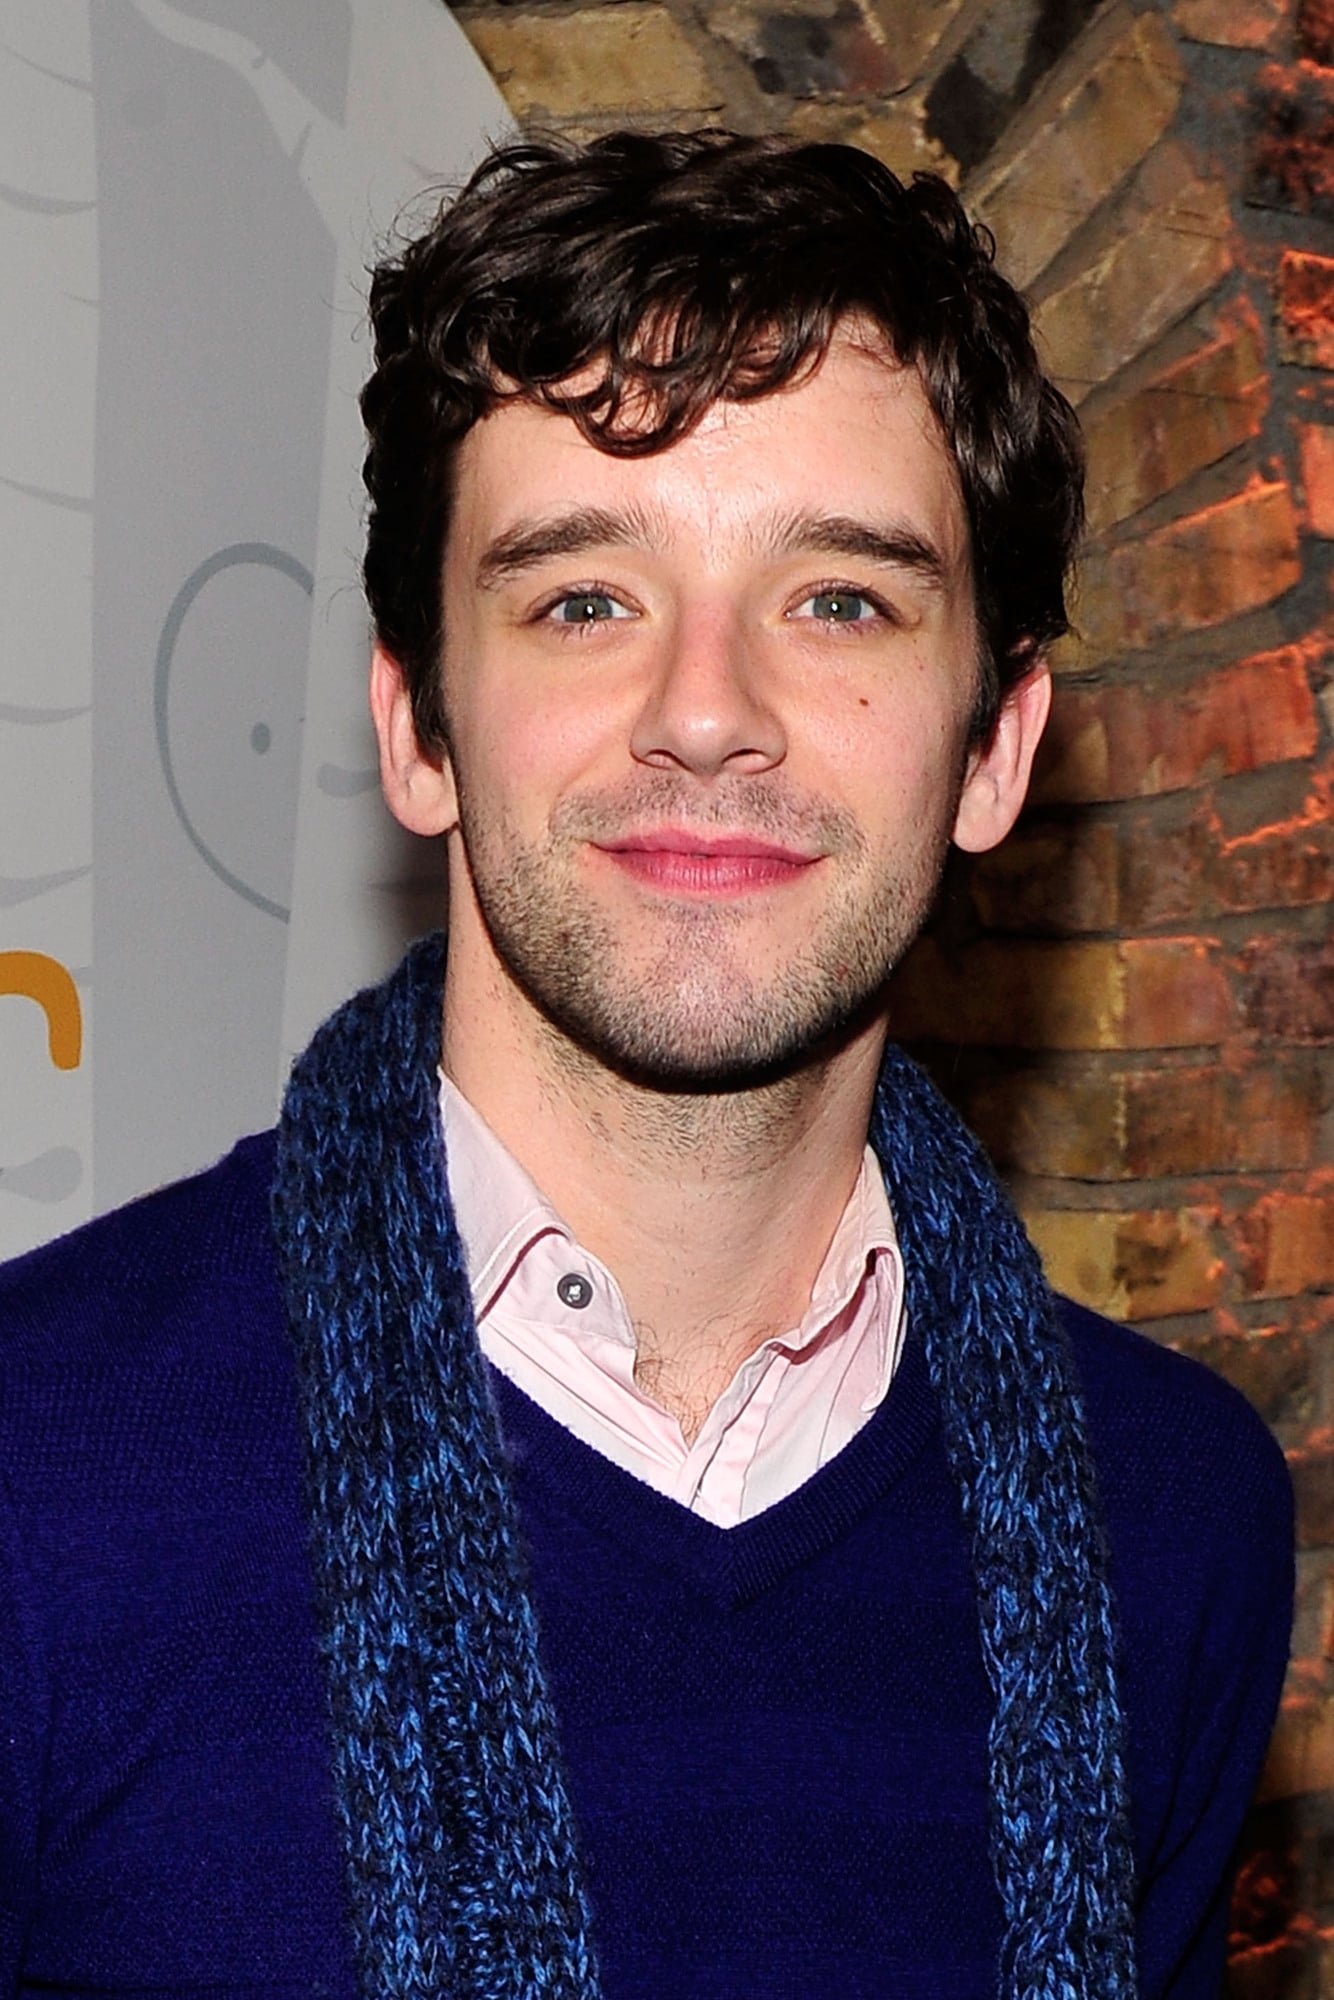 Michael Urie About Entertainment.ie